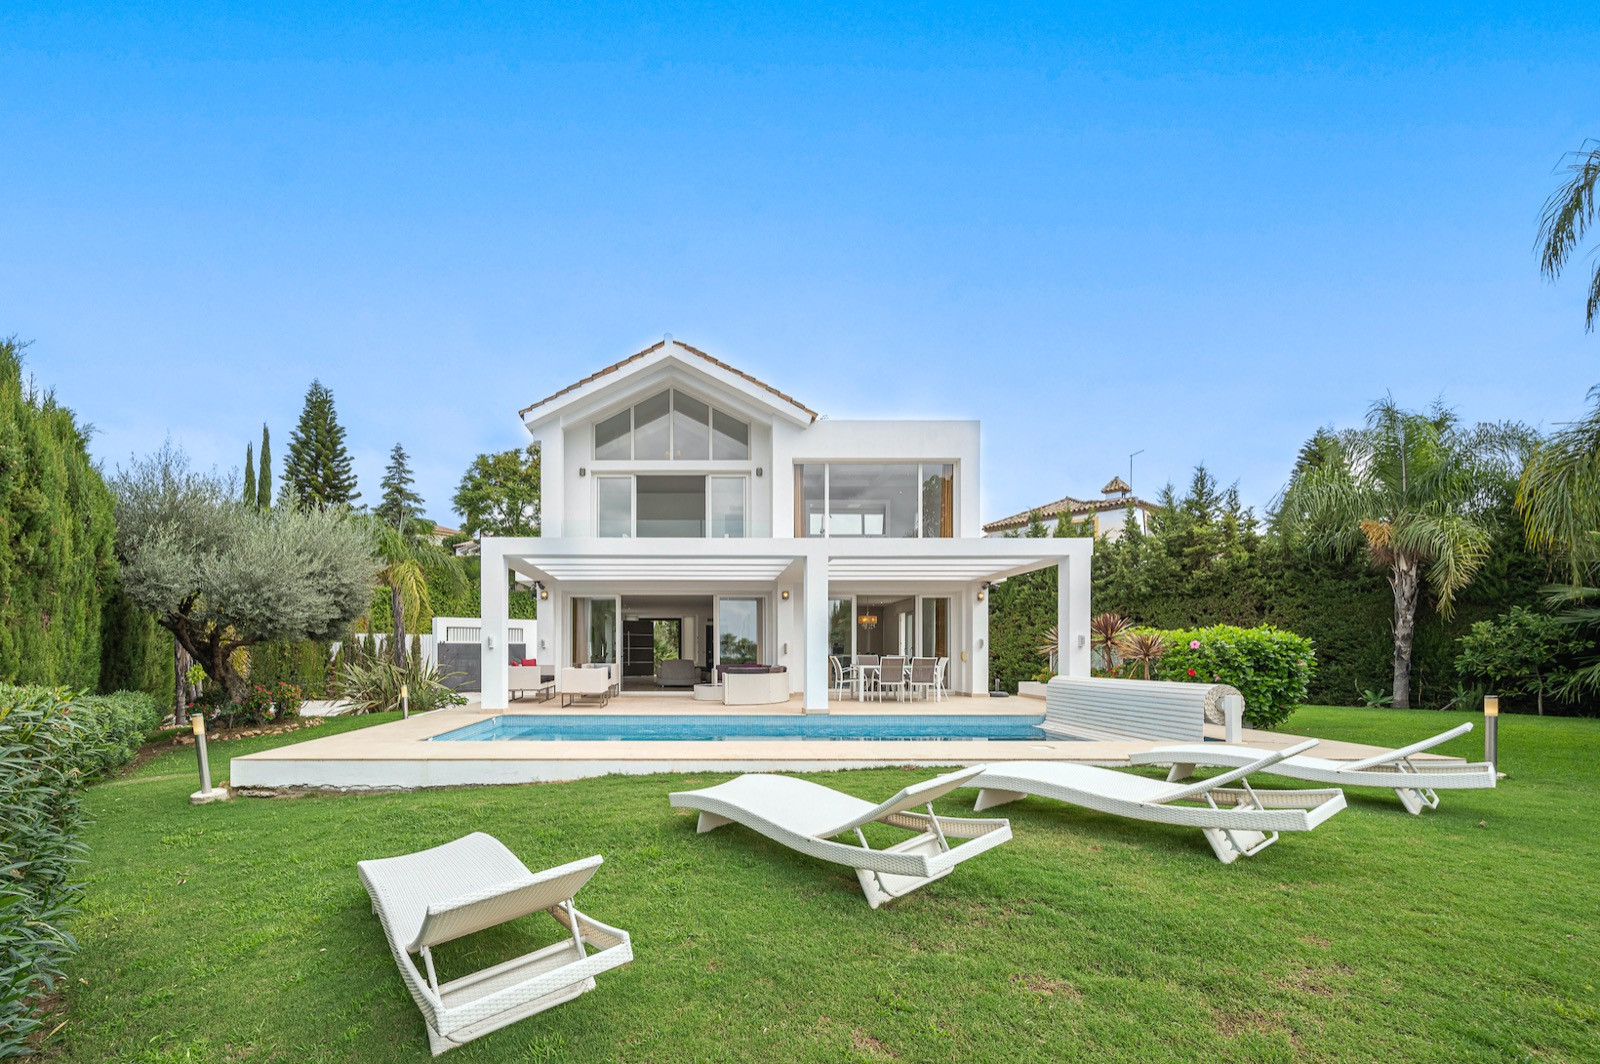 Great opportunity! Recently refurbished villa with great sea and garden views in Paraiso Alto